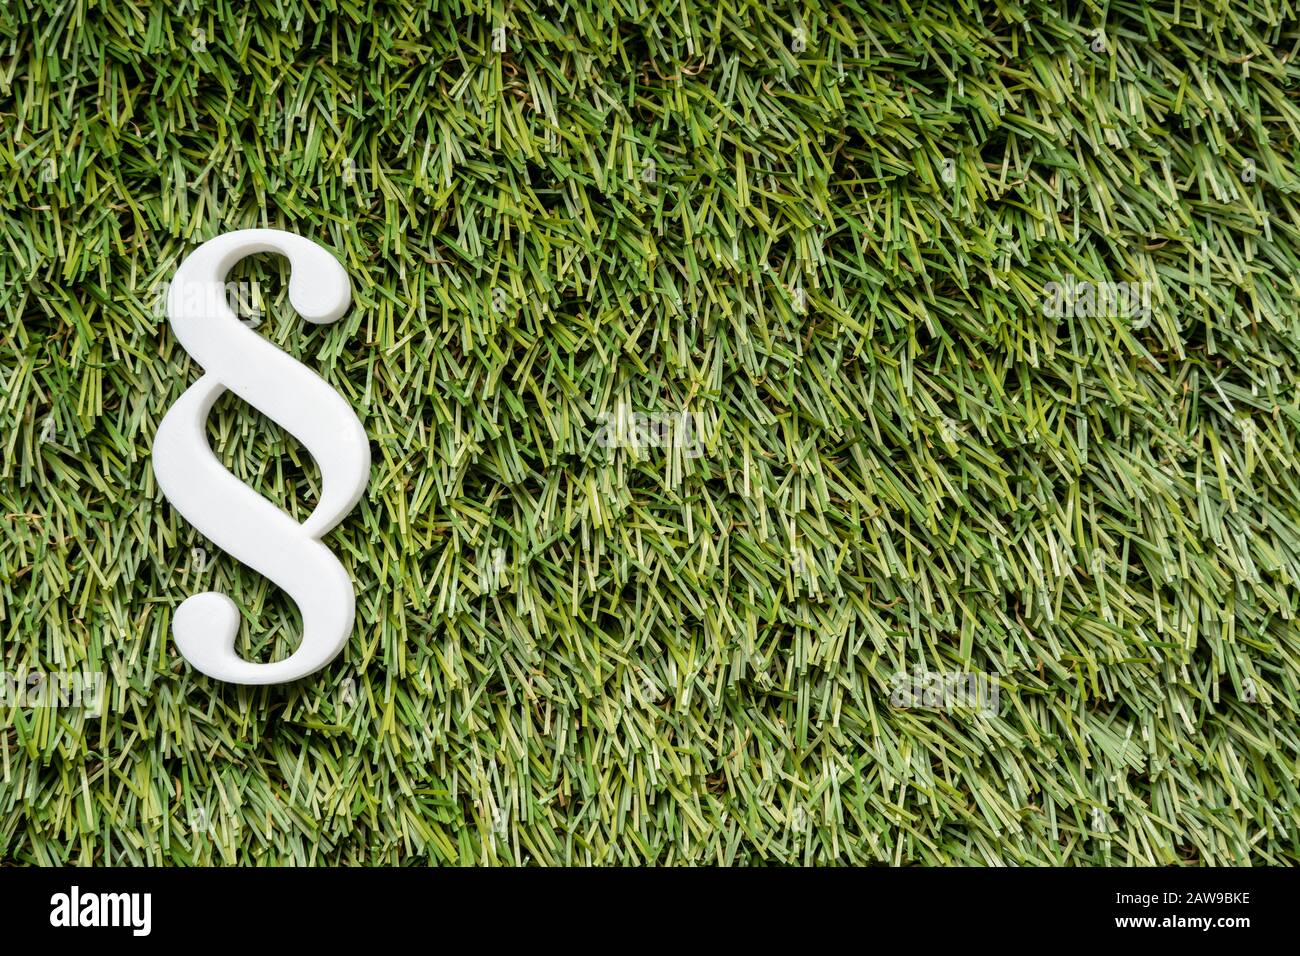 Photo Of Paragraph Sign On Green Grass Lawn Stock Photo